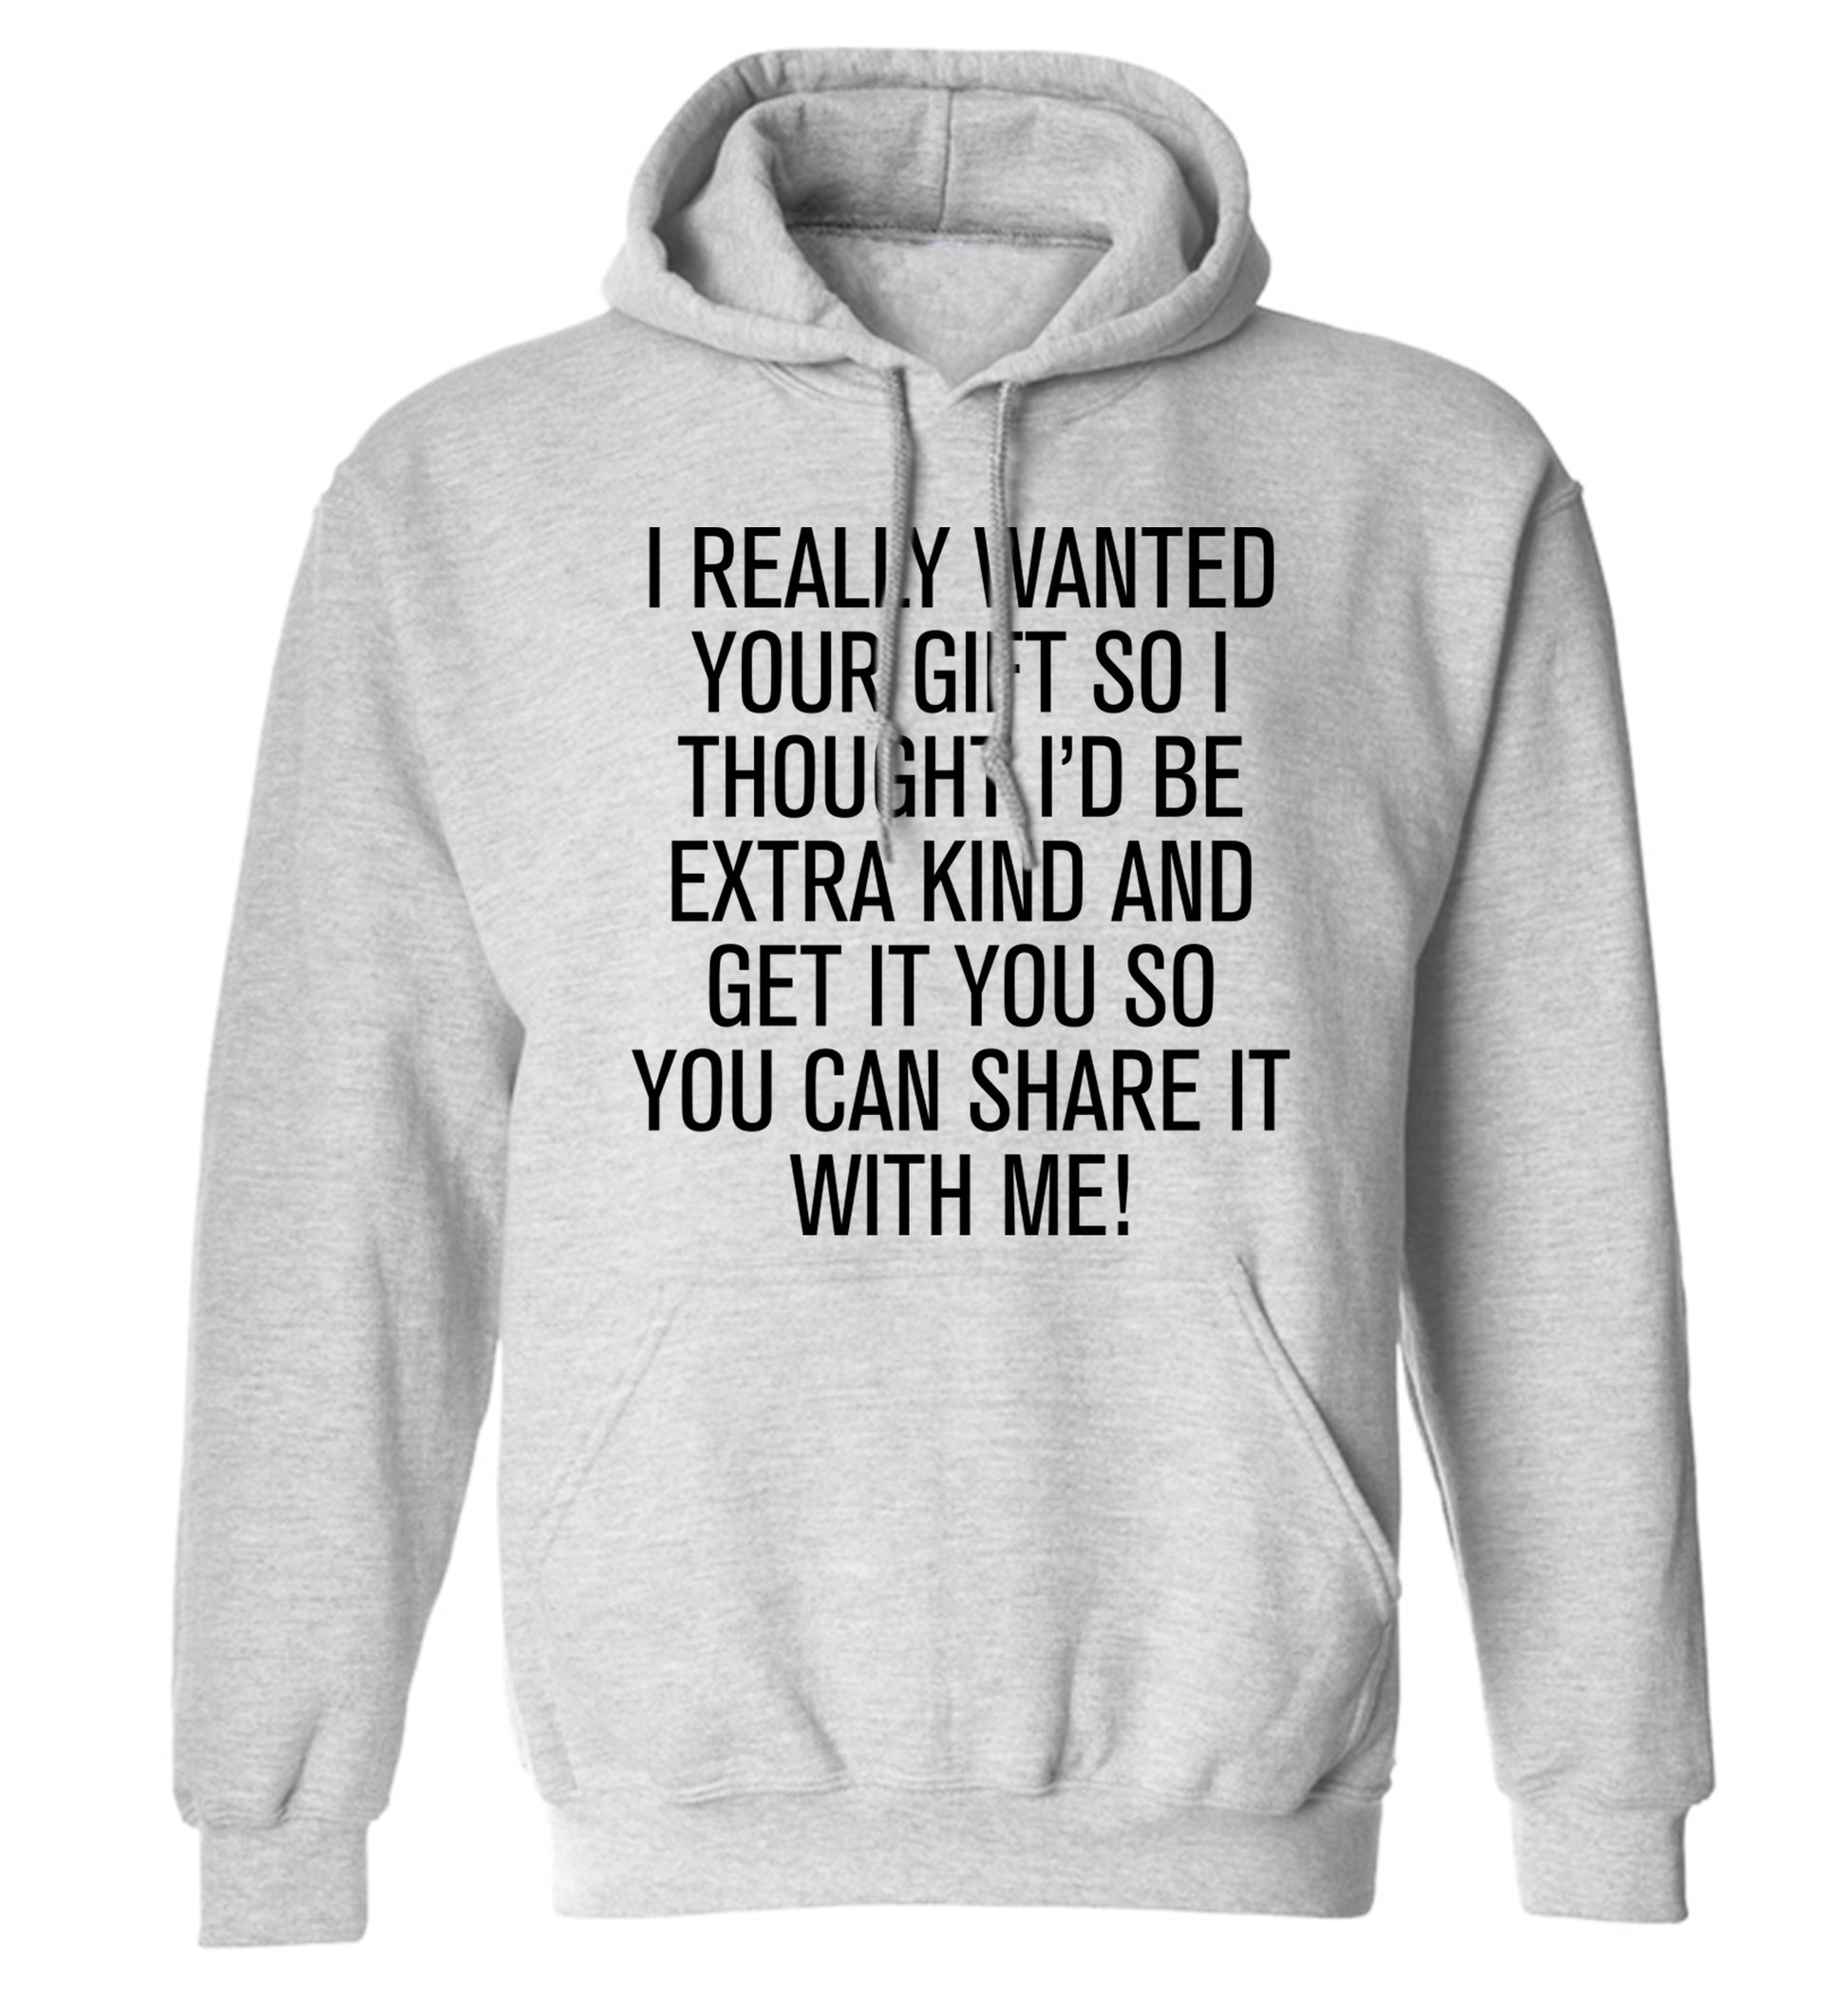 I really wanted your gift adults unisex grey hoodie 2XL